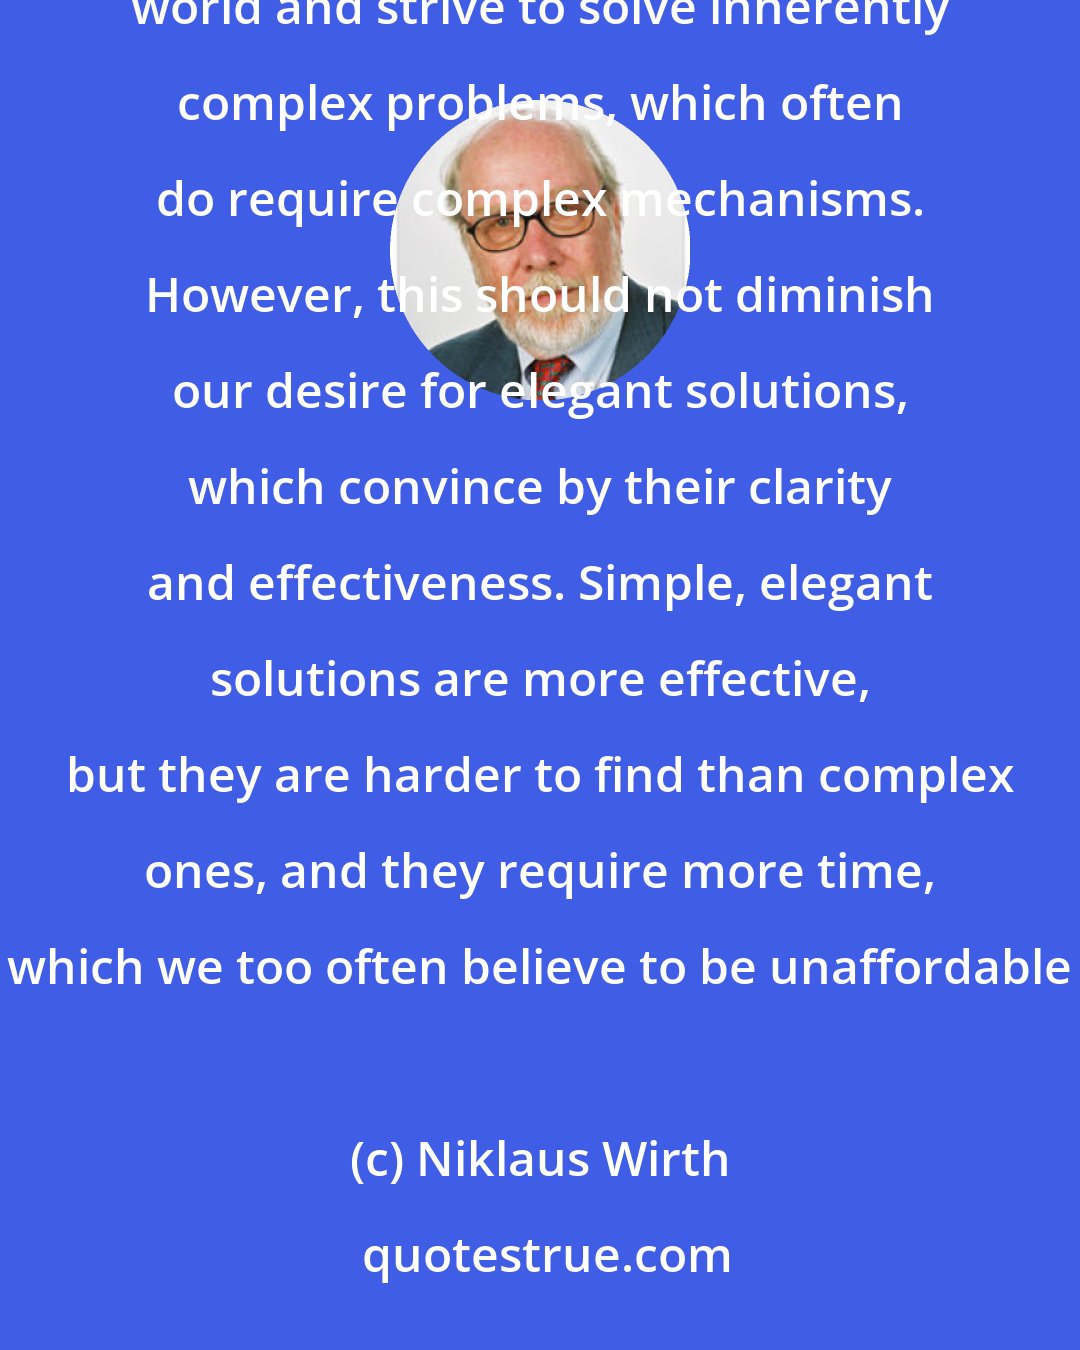 Niklaus Wirth: Complexity has and will maintain a strong fascination for many people. It is true that we live in a complex world and strive to solve inherently complex problems, which often do require complex mechanisms. However, this should not diminish our desire for elegant solutions, which convince by their clarity and effectiveness. Simple, elegant solutions are more effective, but they are harder to find than complex ones, and they require more time, which we too often believe to be unaffordable